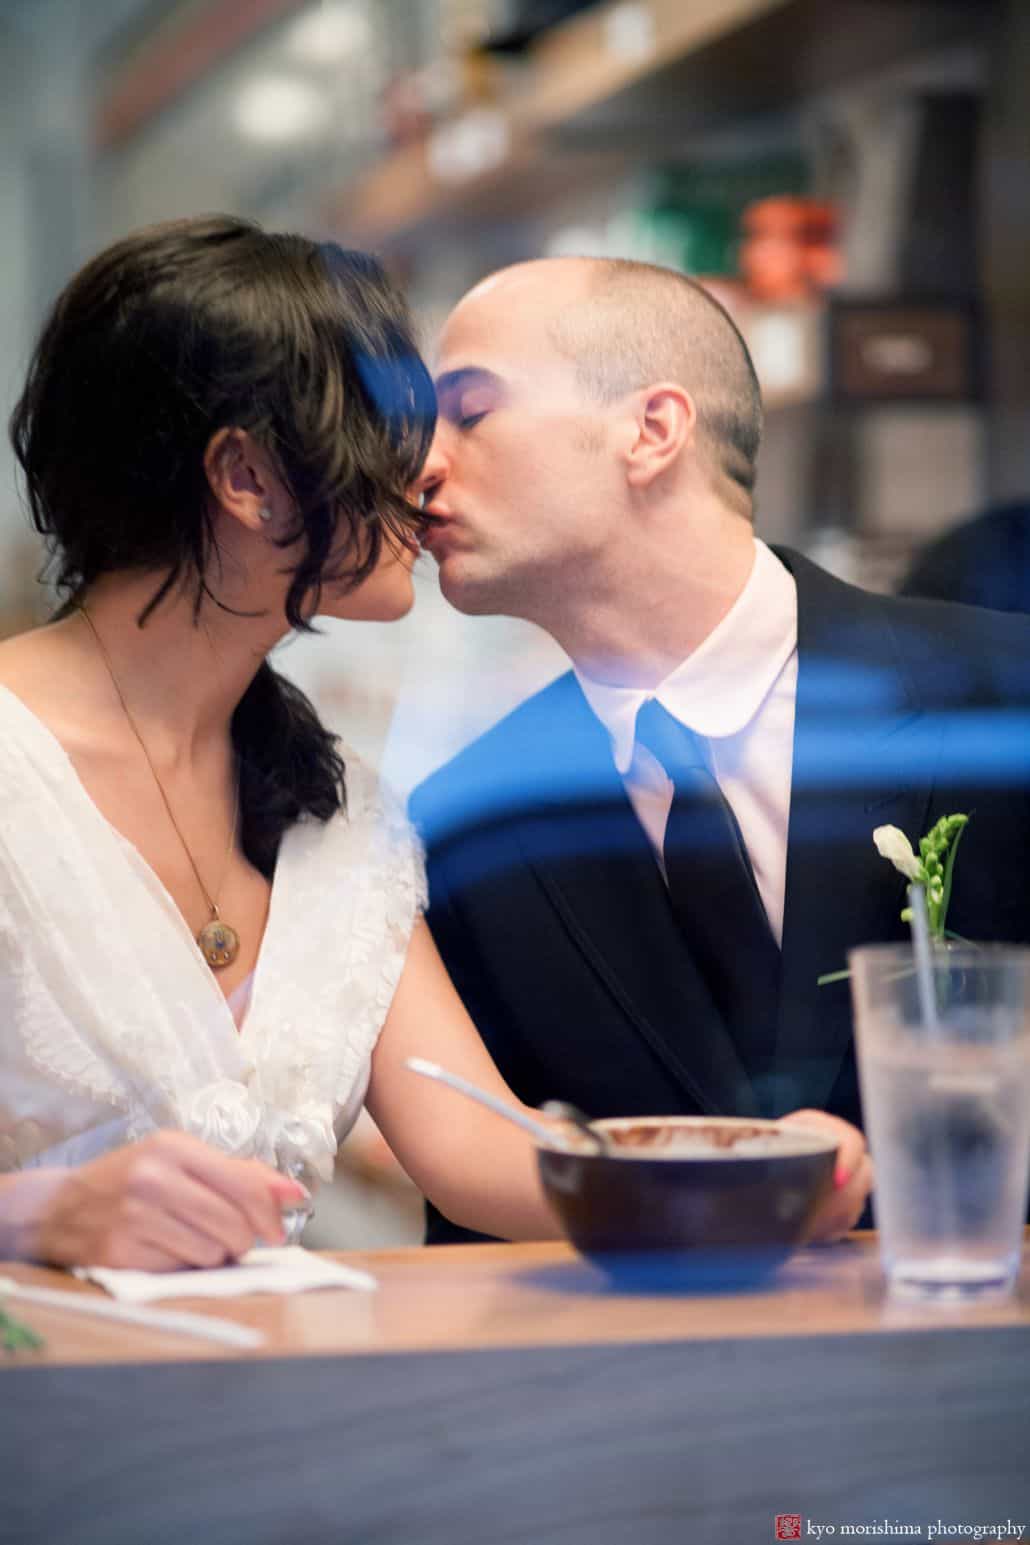 Light-hearted portrait session of a couple who are about to kiss, sitting inside a cafe, and they have a glass of water and a bowl of food on the table, photographed by wedding photographer in central NJ Kyo Morishima.